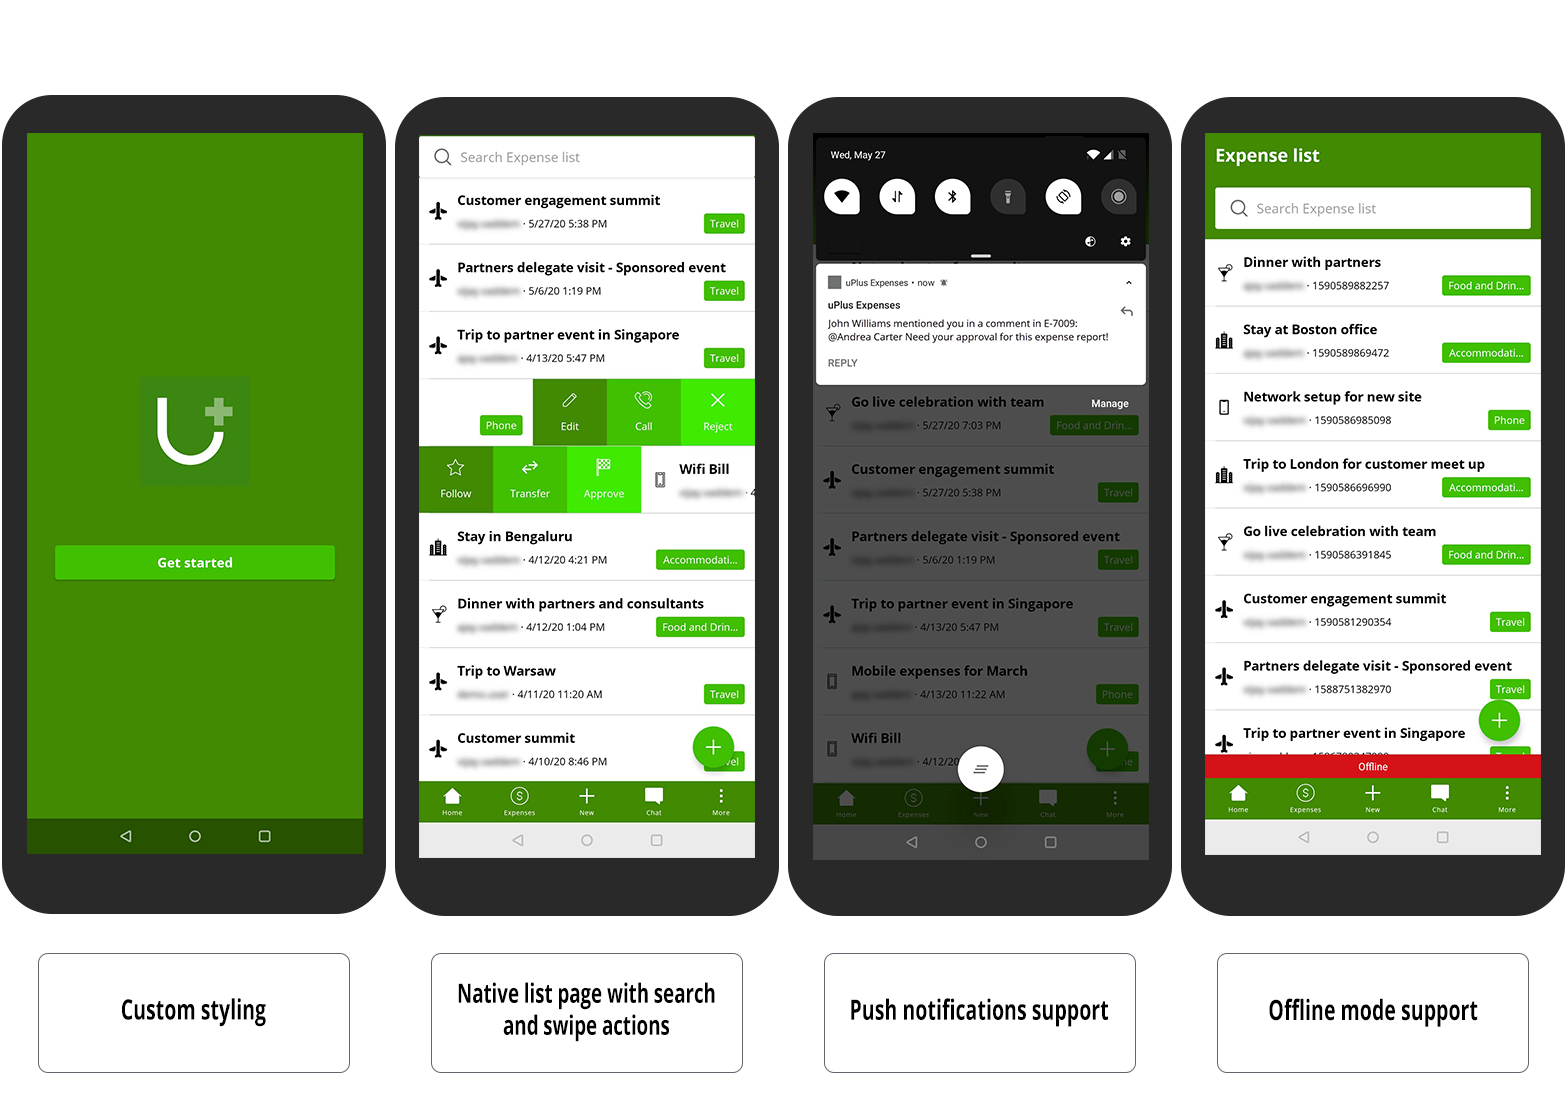 Overview of mobile features with custom styling, push notifications, offline mode, and native list pages with swipe actions.